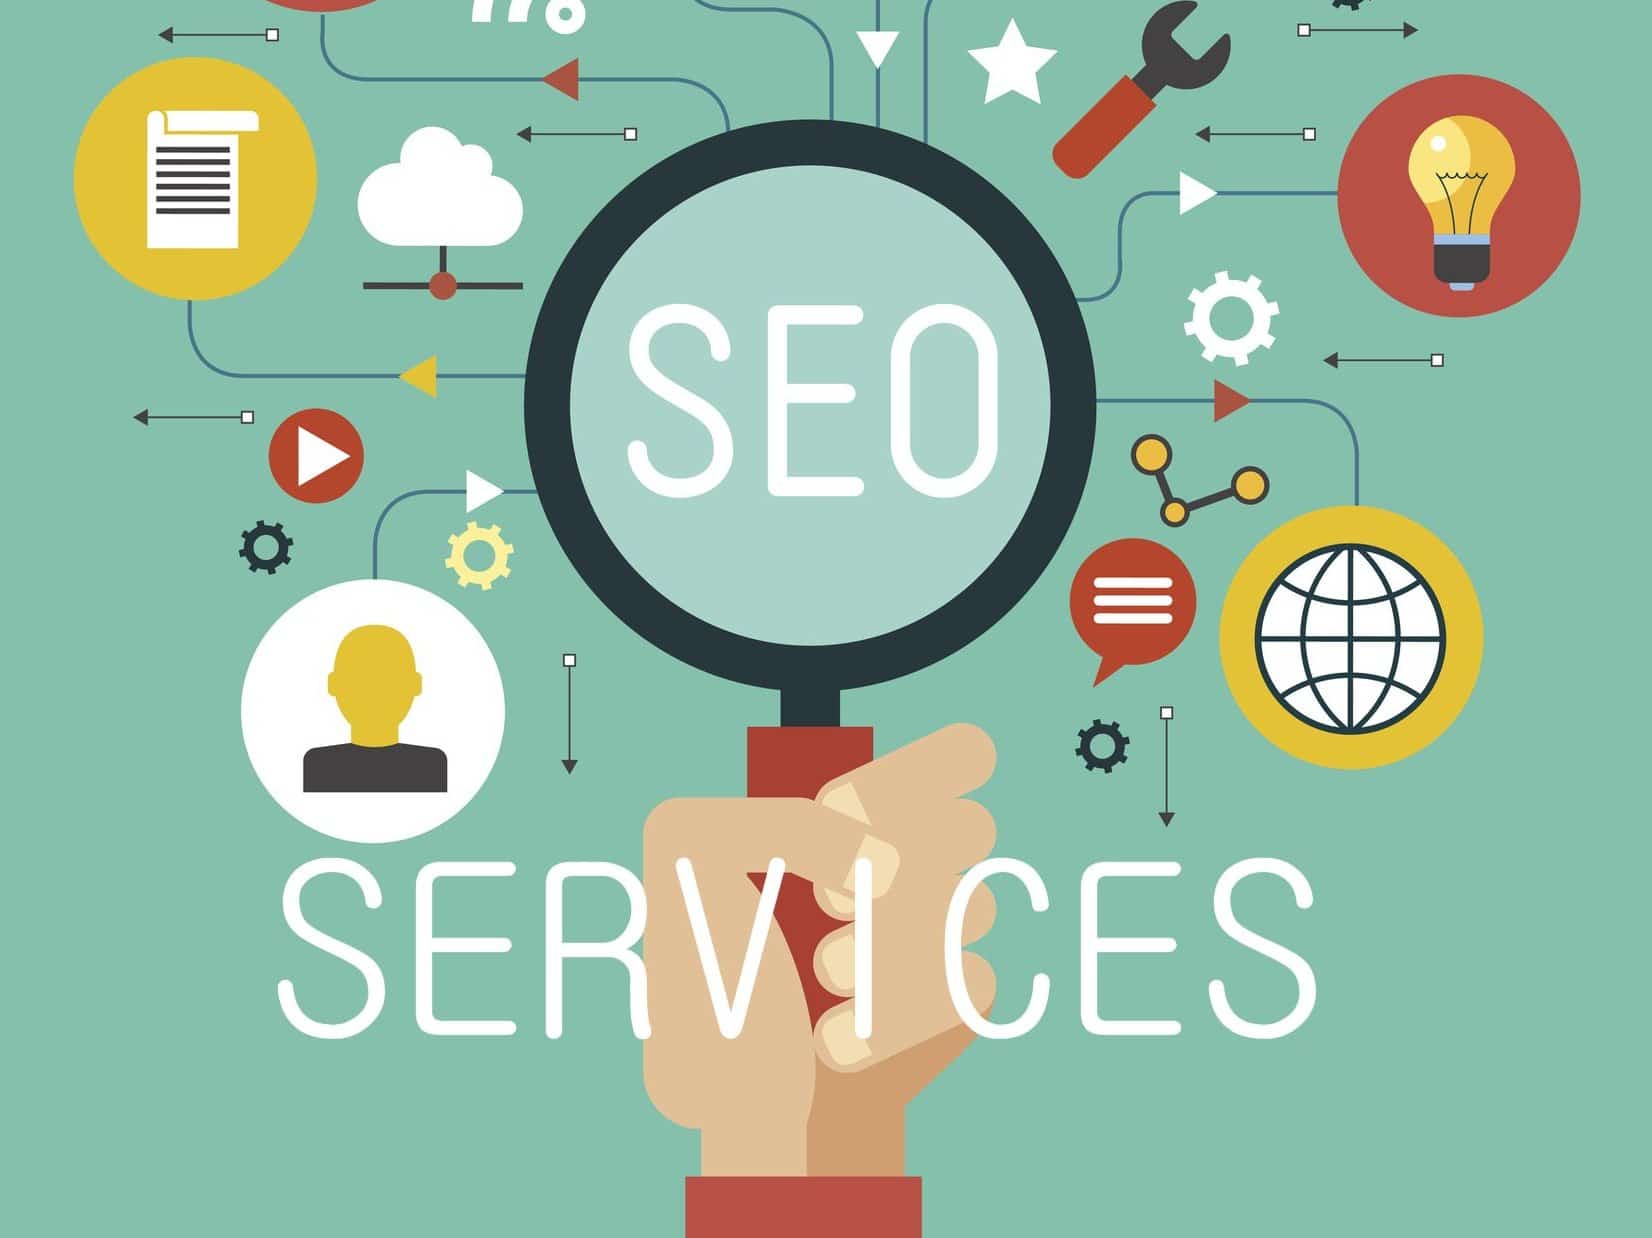 SEO services help your business grow